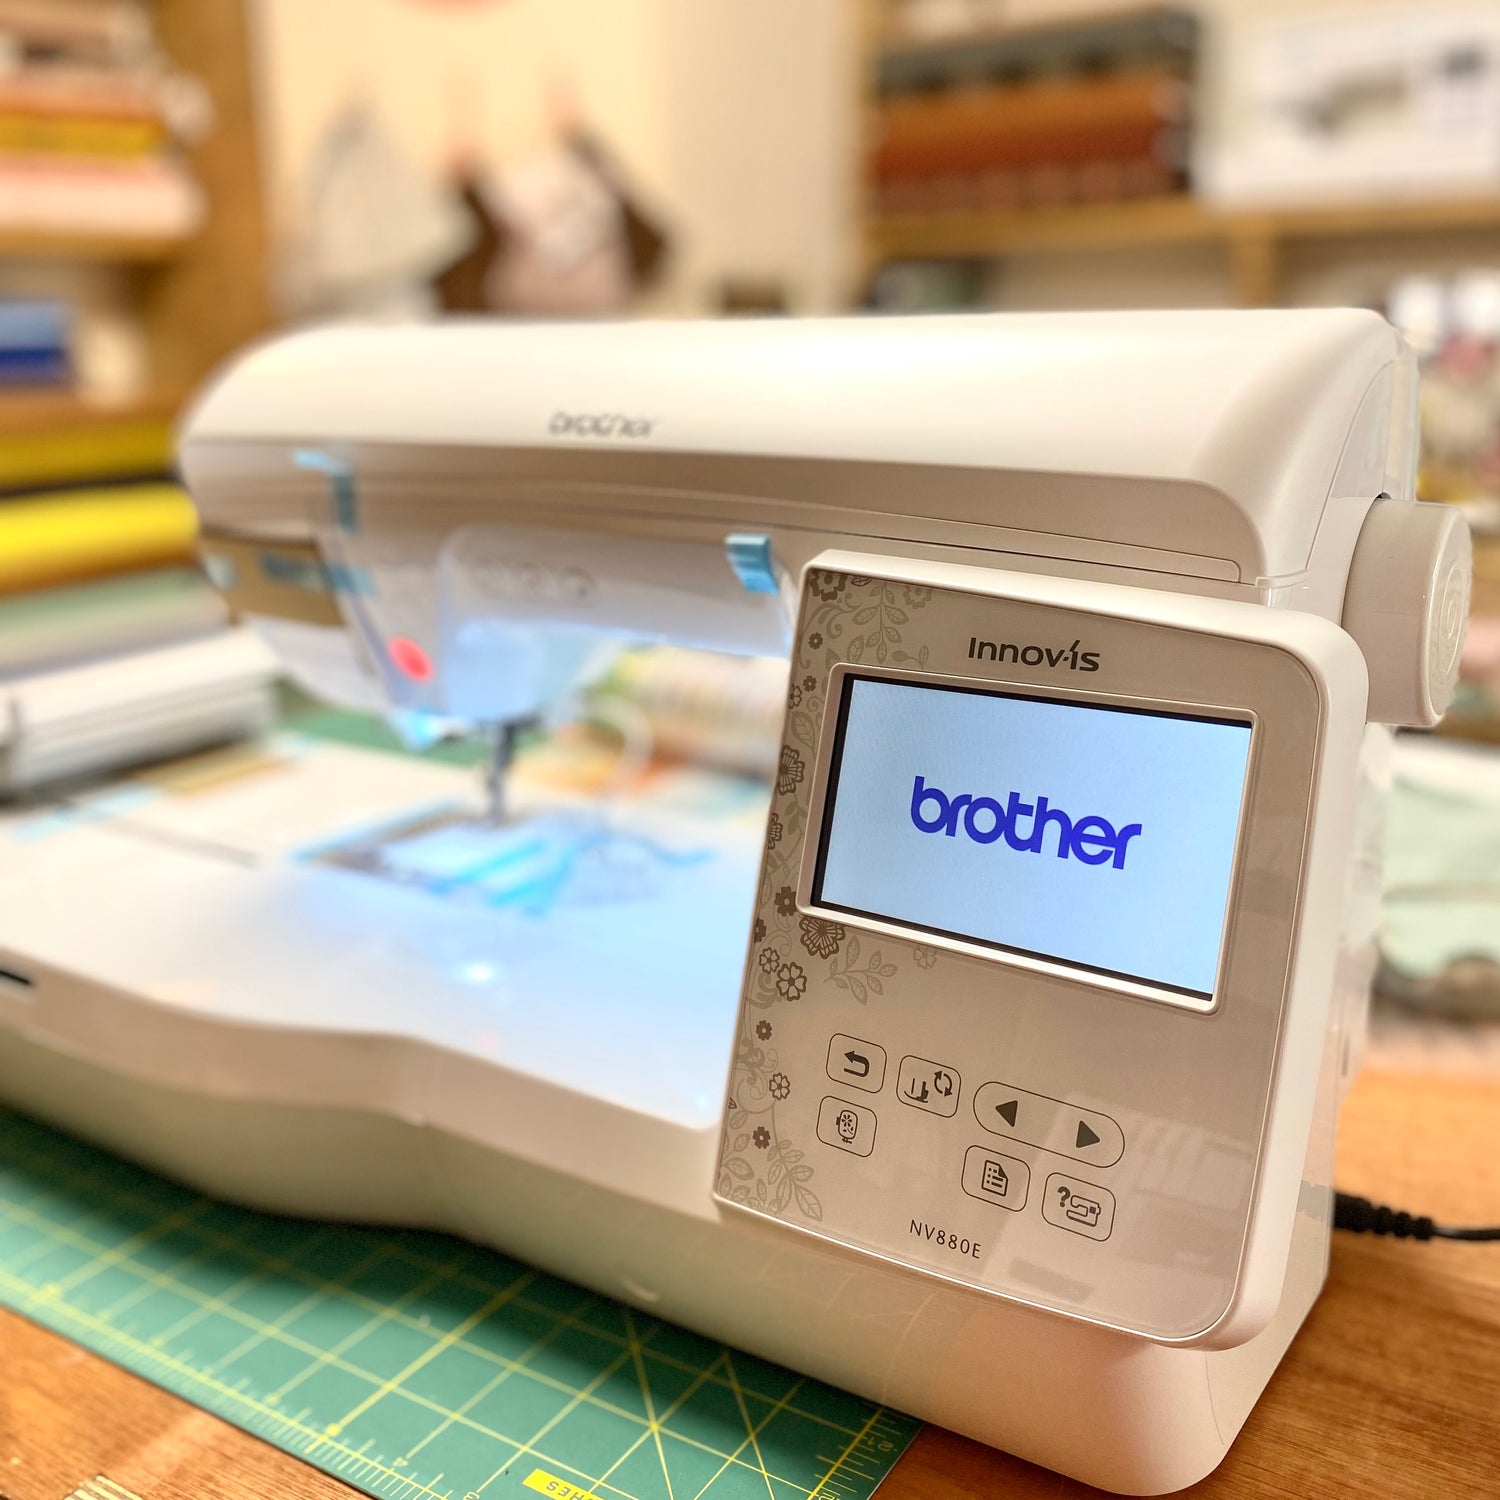 A close up image of the screen of the Brother innovis 880e embroidery machine showing the Brother branding